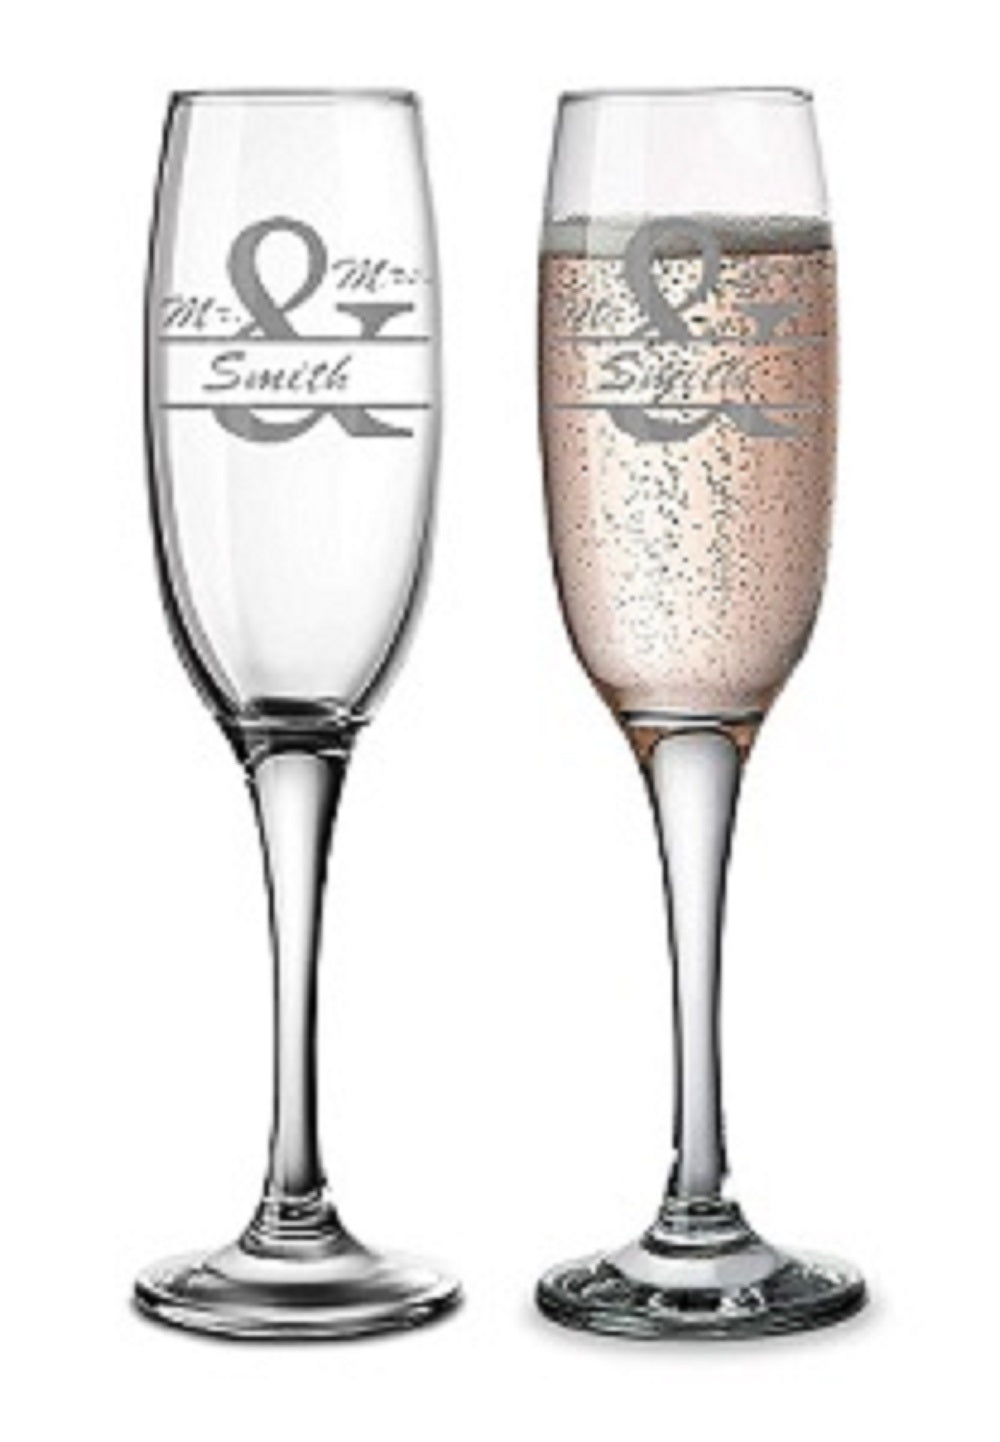 GIFTS INFINITY Engraved Bride and Groom Wedding Champagne Flutes Set of 2 Personalized Toasting Glasses (Mr & Mrs)